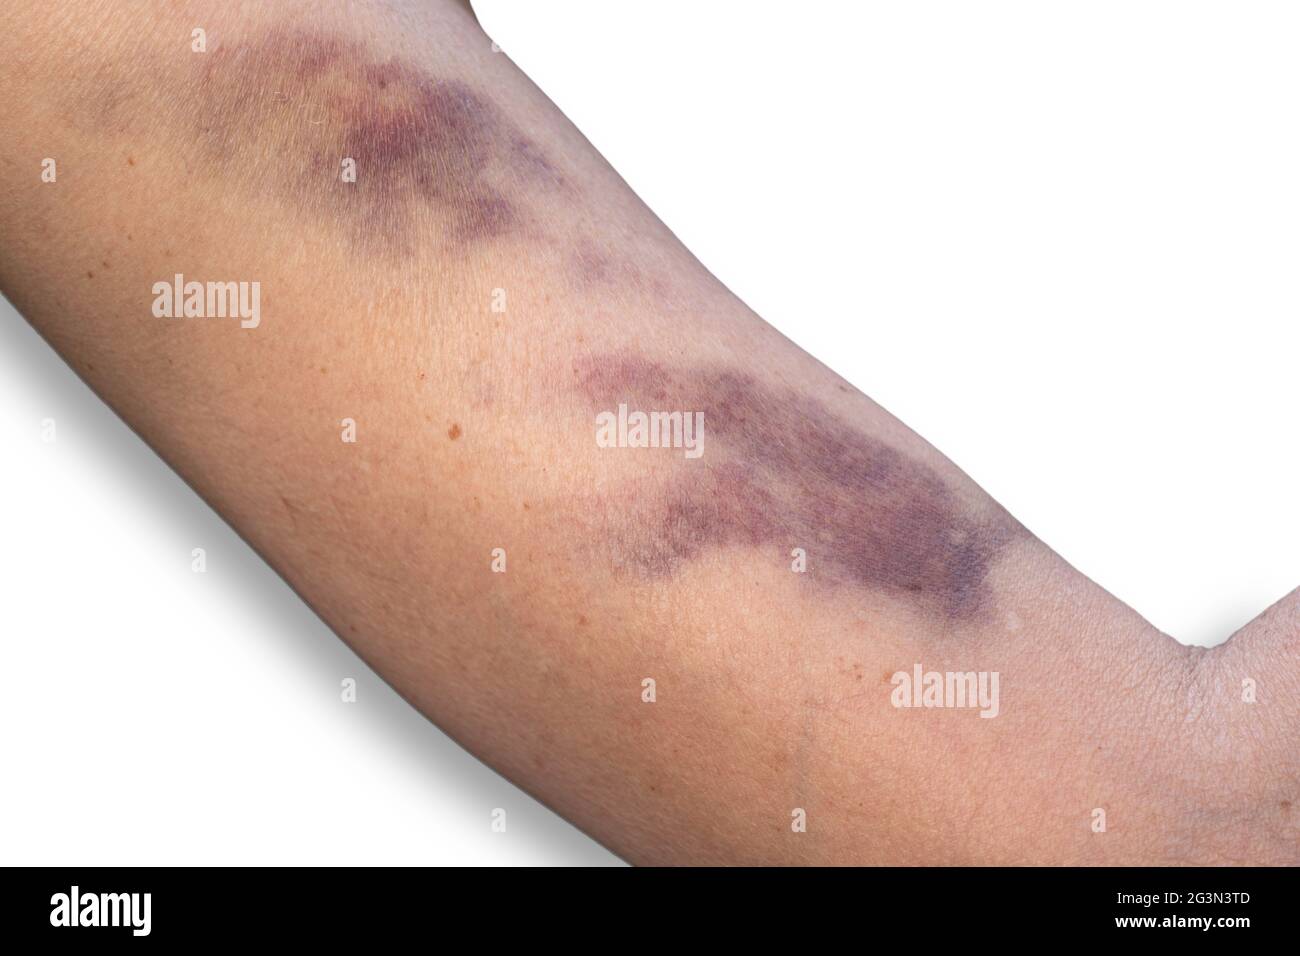 Bruise on the skin of a woman's upper arm, caused by an injury or domestic violence. On white background Stock Photo